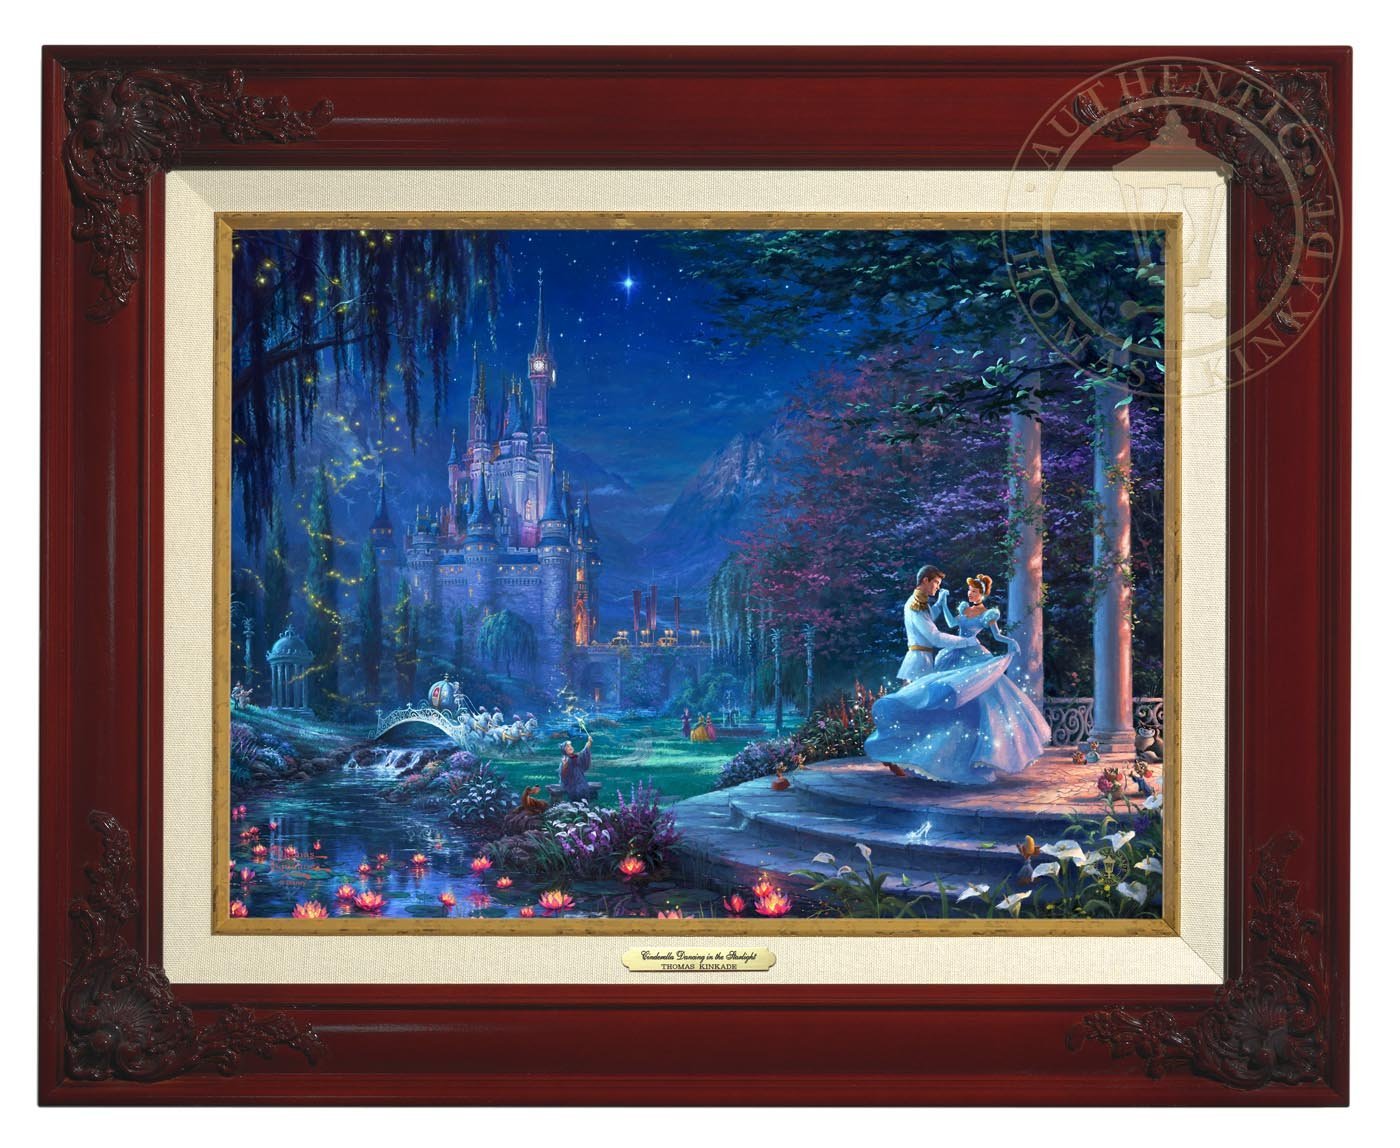 Cinderella Dancing in the Starlight - Cinderella's dreams have come true under the starlight Cinderella is dancing with her prince  - Brandy Frame